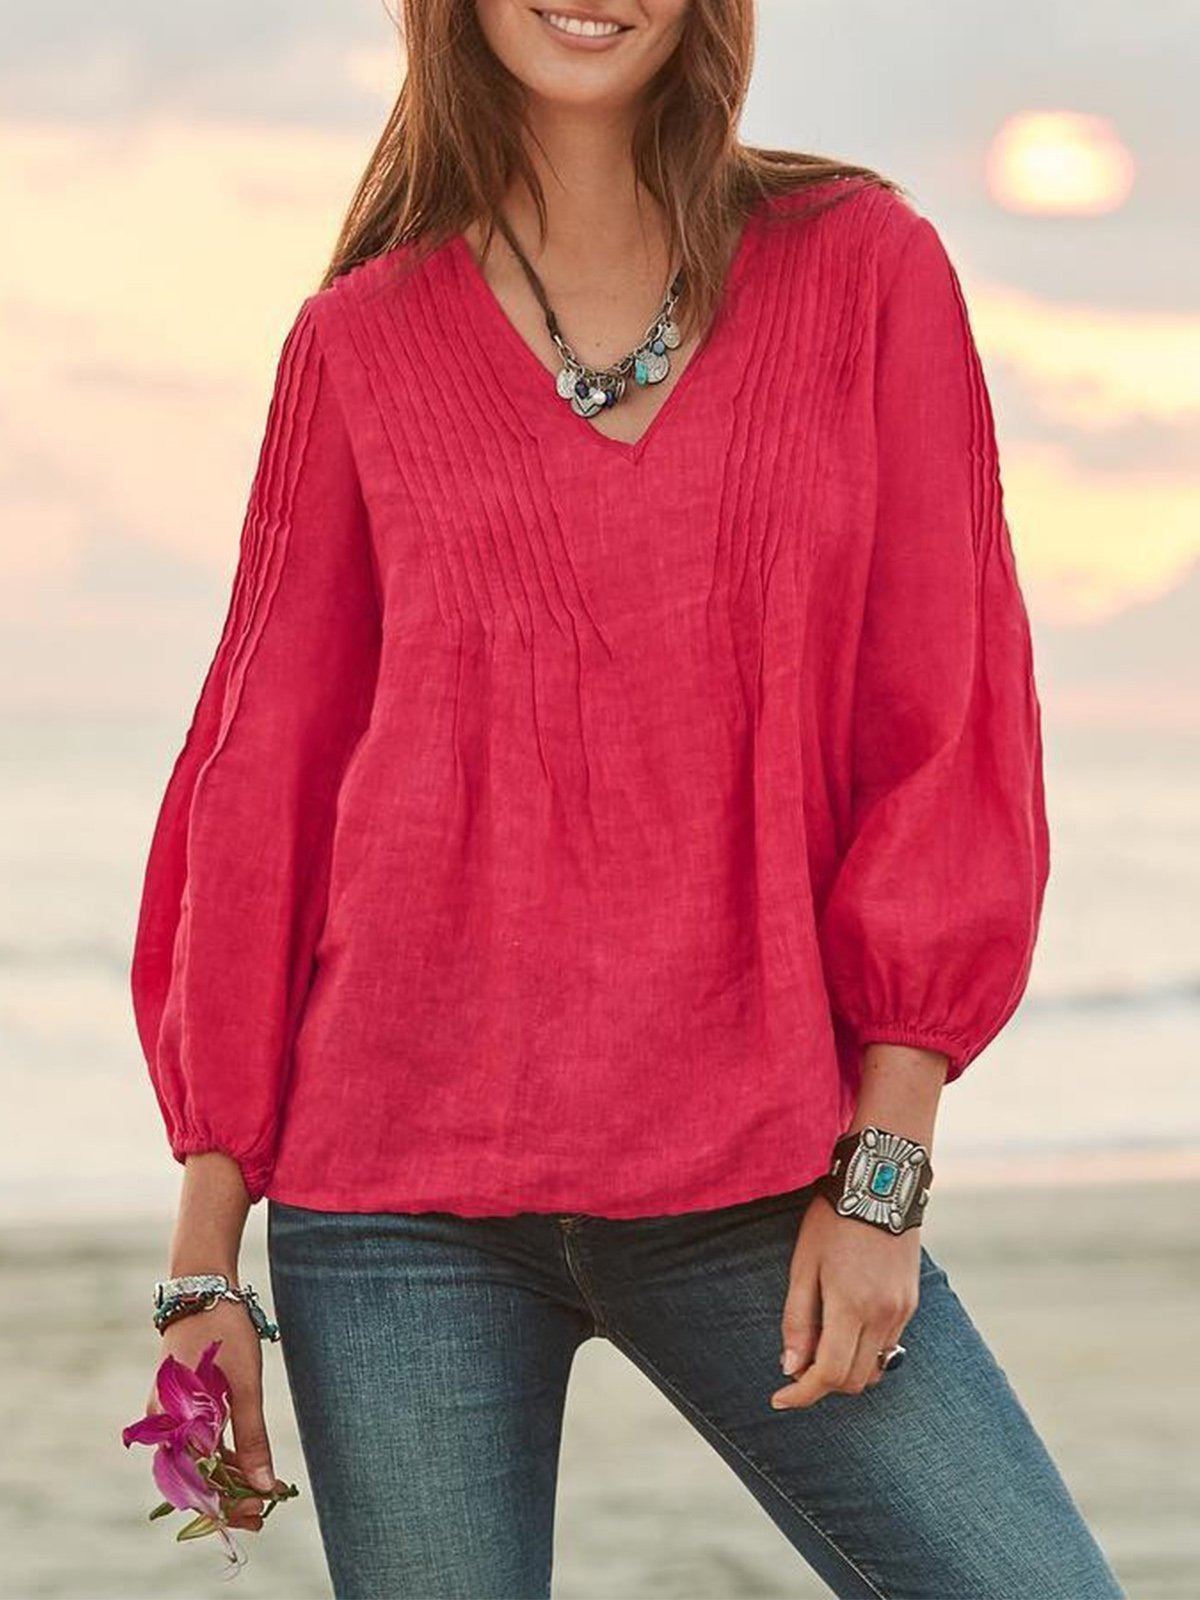 Women's Thin Solid Cotton Casual Tops